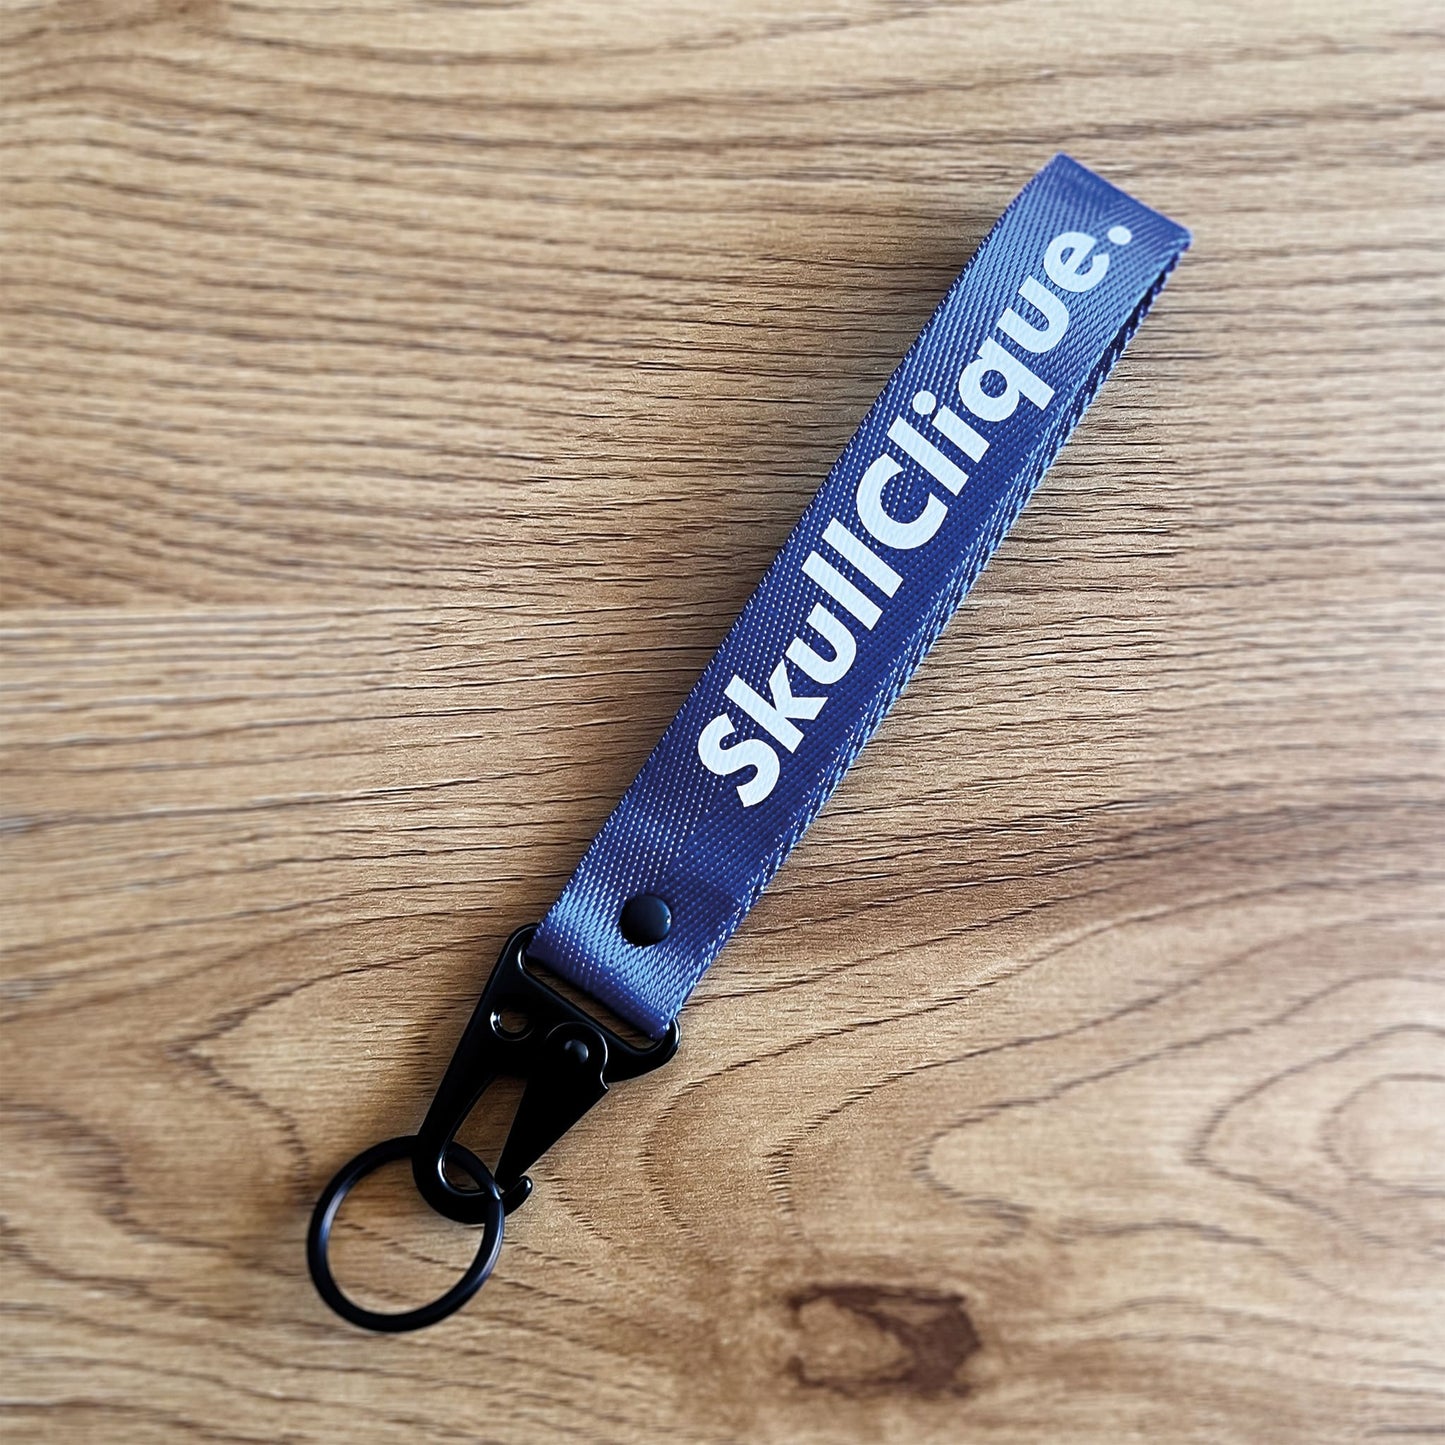 TACTICAL CLIP KEYRING - ALWAYS TIRED